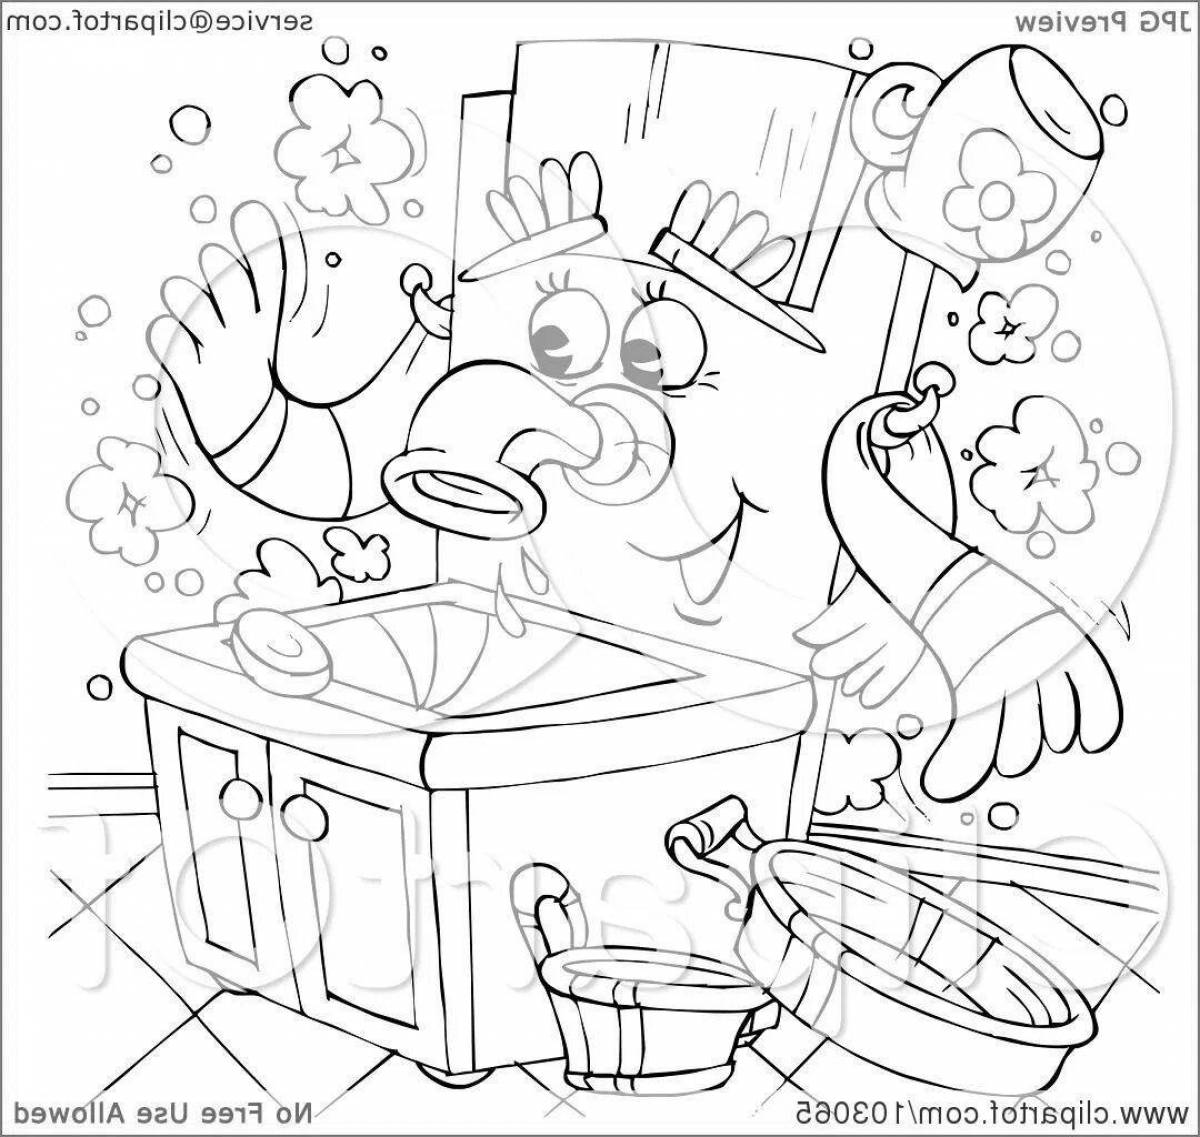 Glorious moidodyr coloring pages for kids